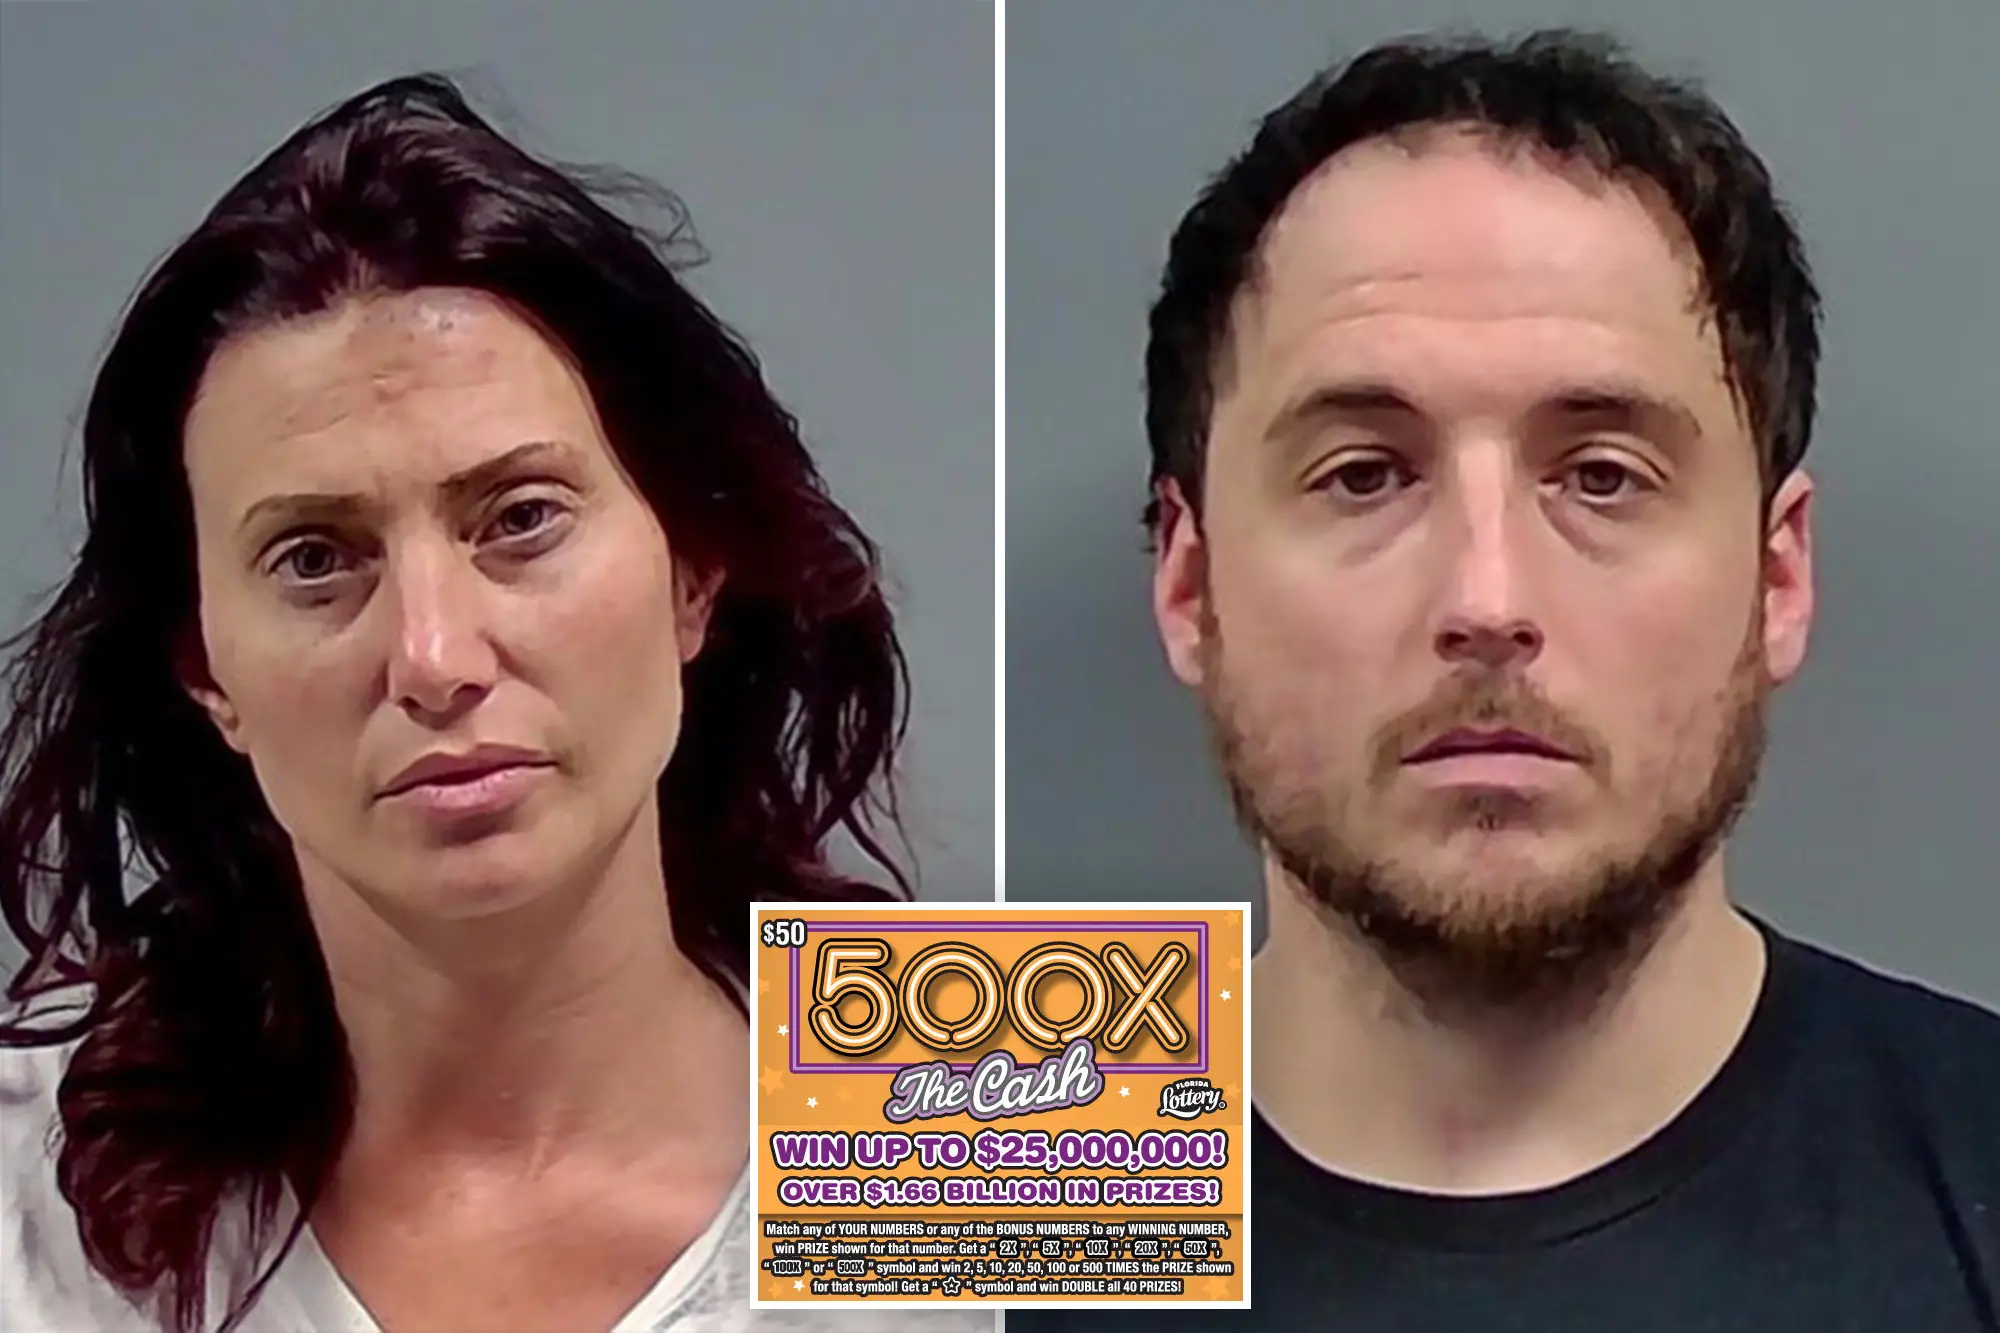 Florida Couple Faces Charges for Fake $1M Lottery Ticket Scam